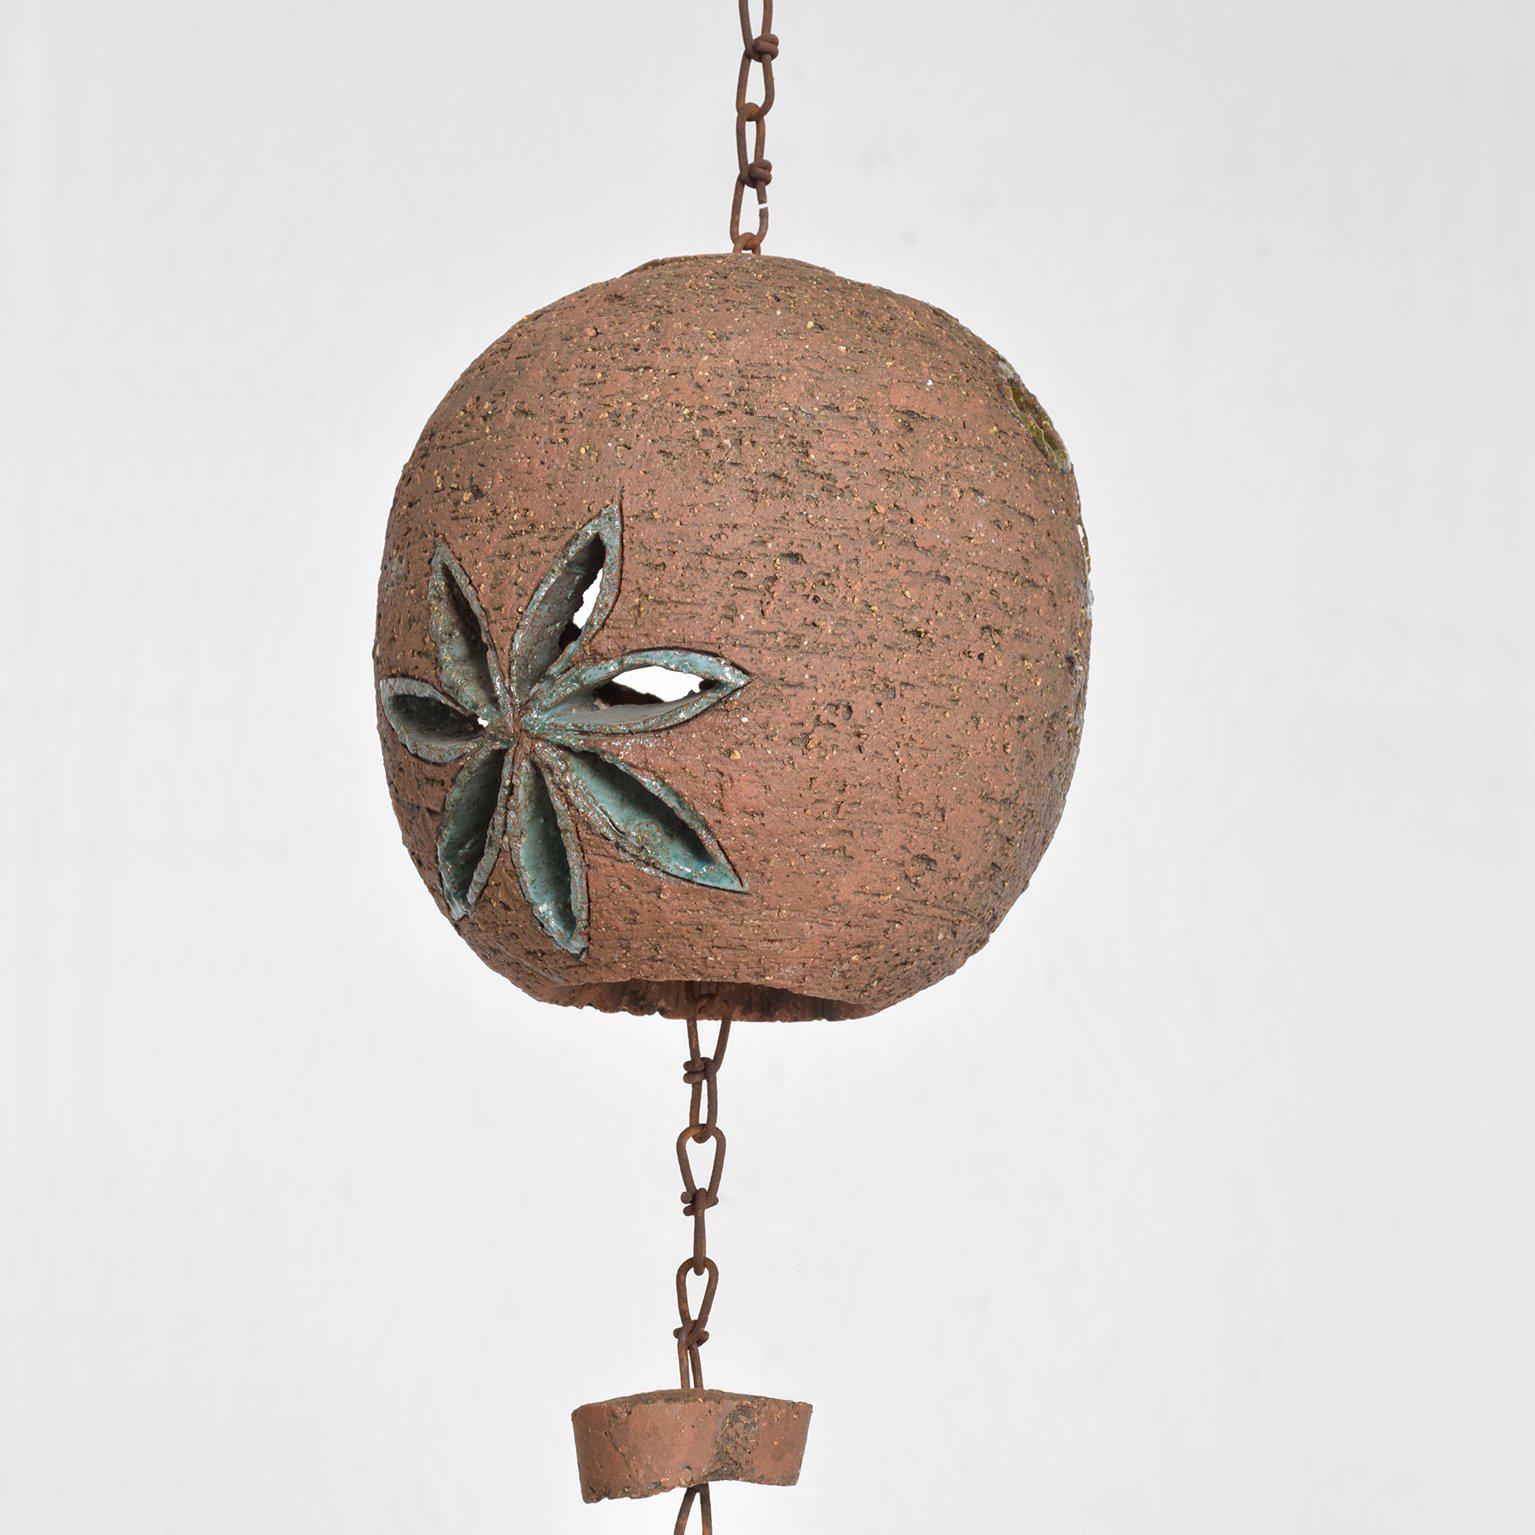 For your consideration a century modern hanging pottery hanging decoration.

Measure: 32